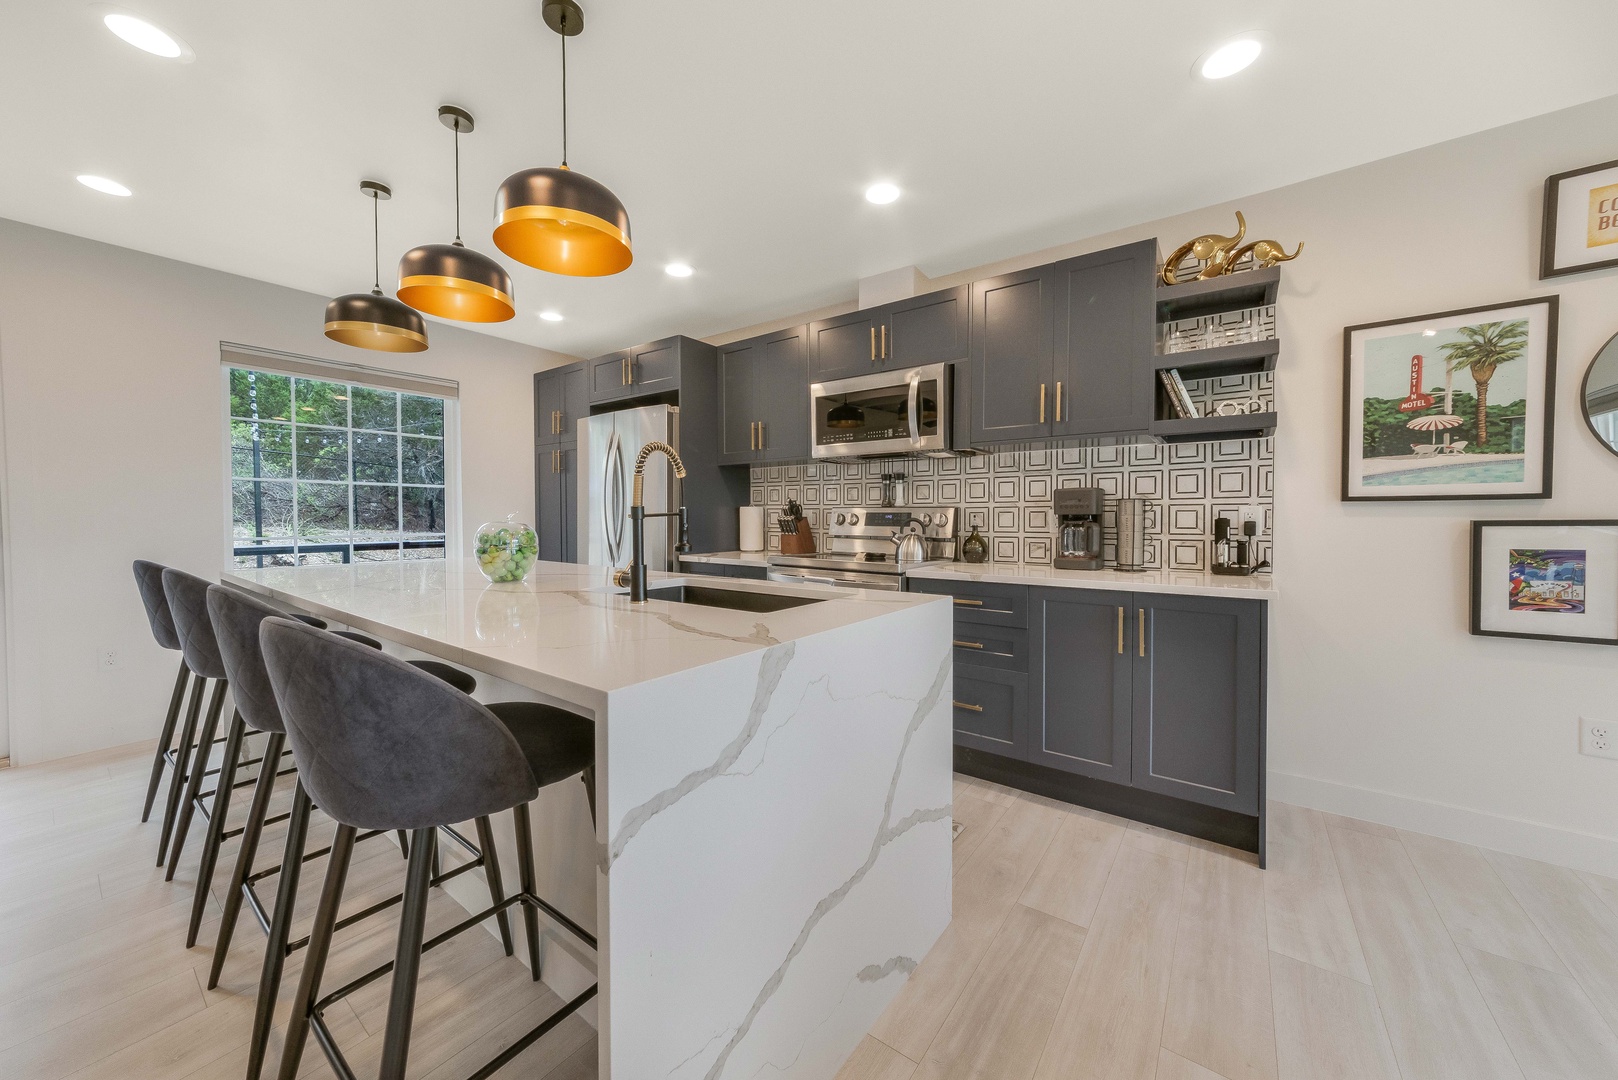 Modern, open, and fully equiped kitchen